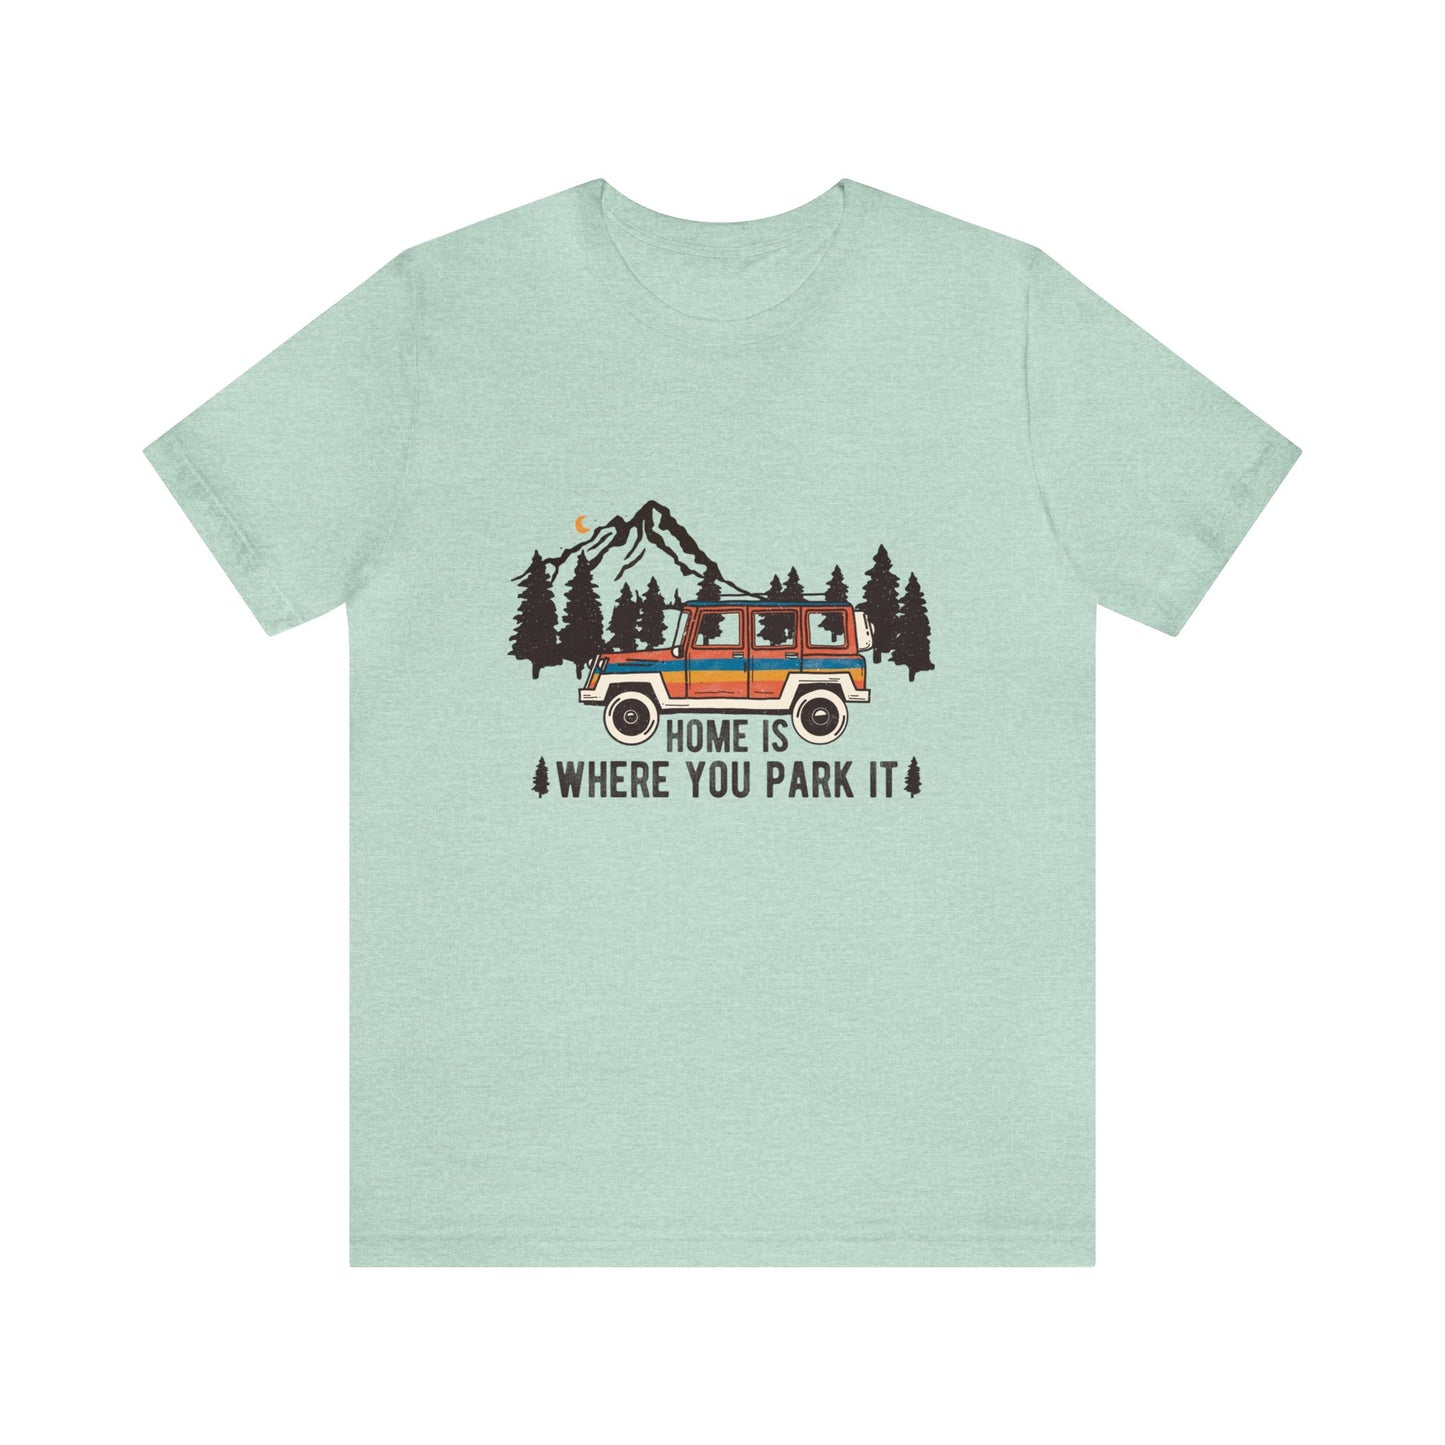 Home is where you park it camping traveling shirt Women's Tshirt